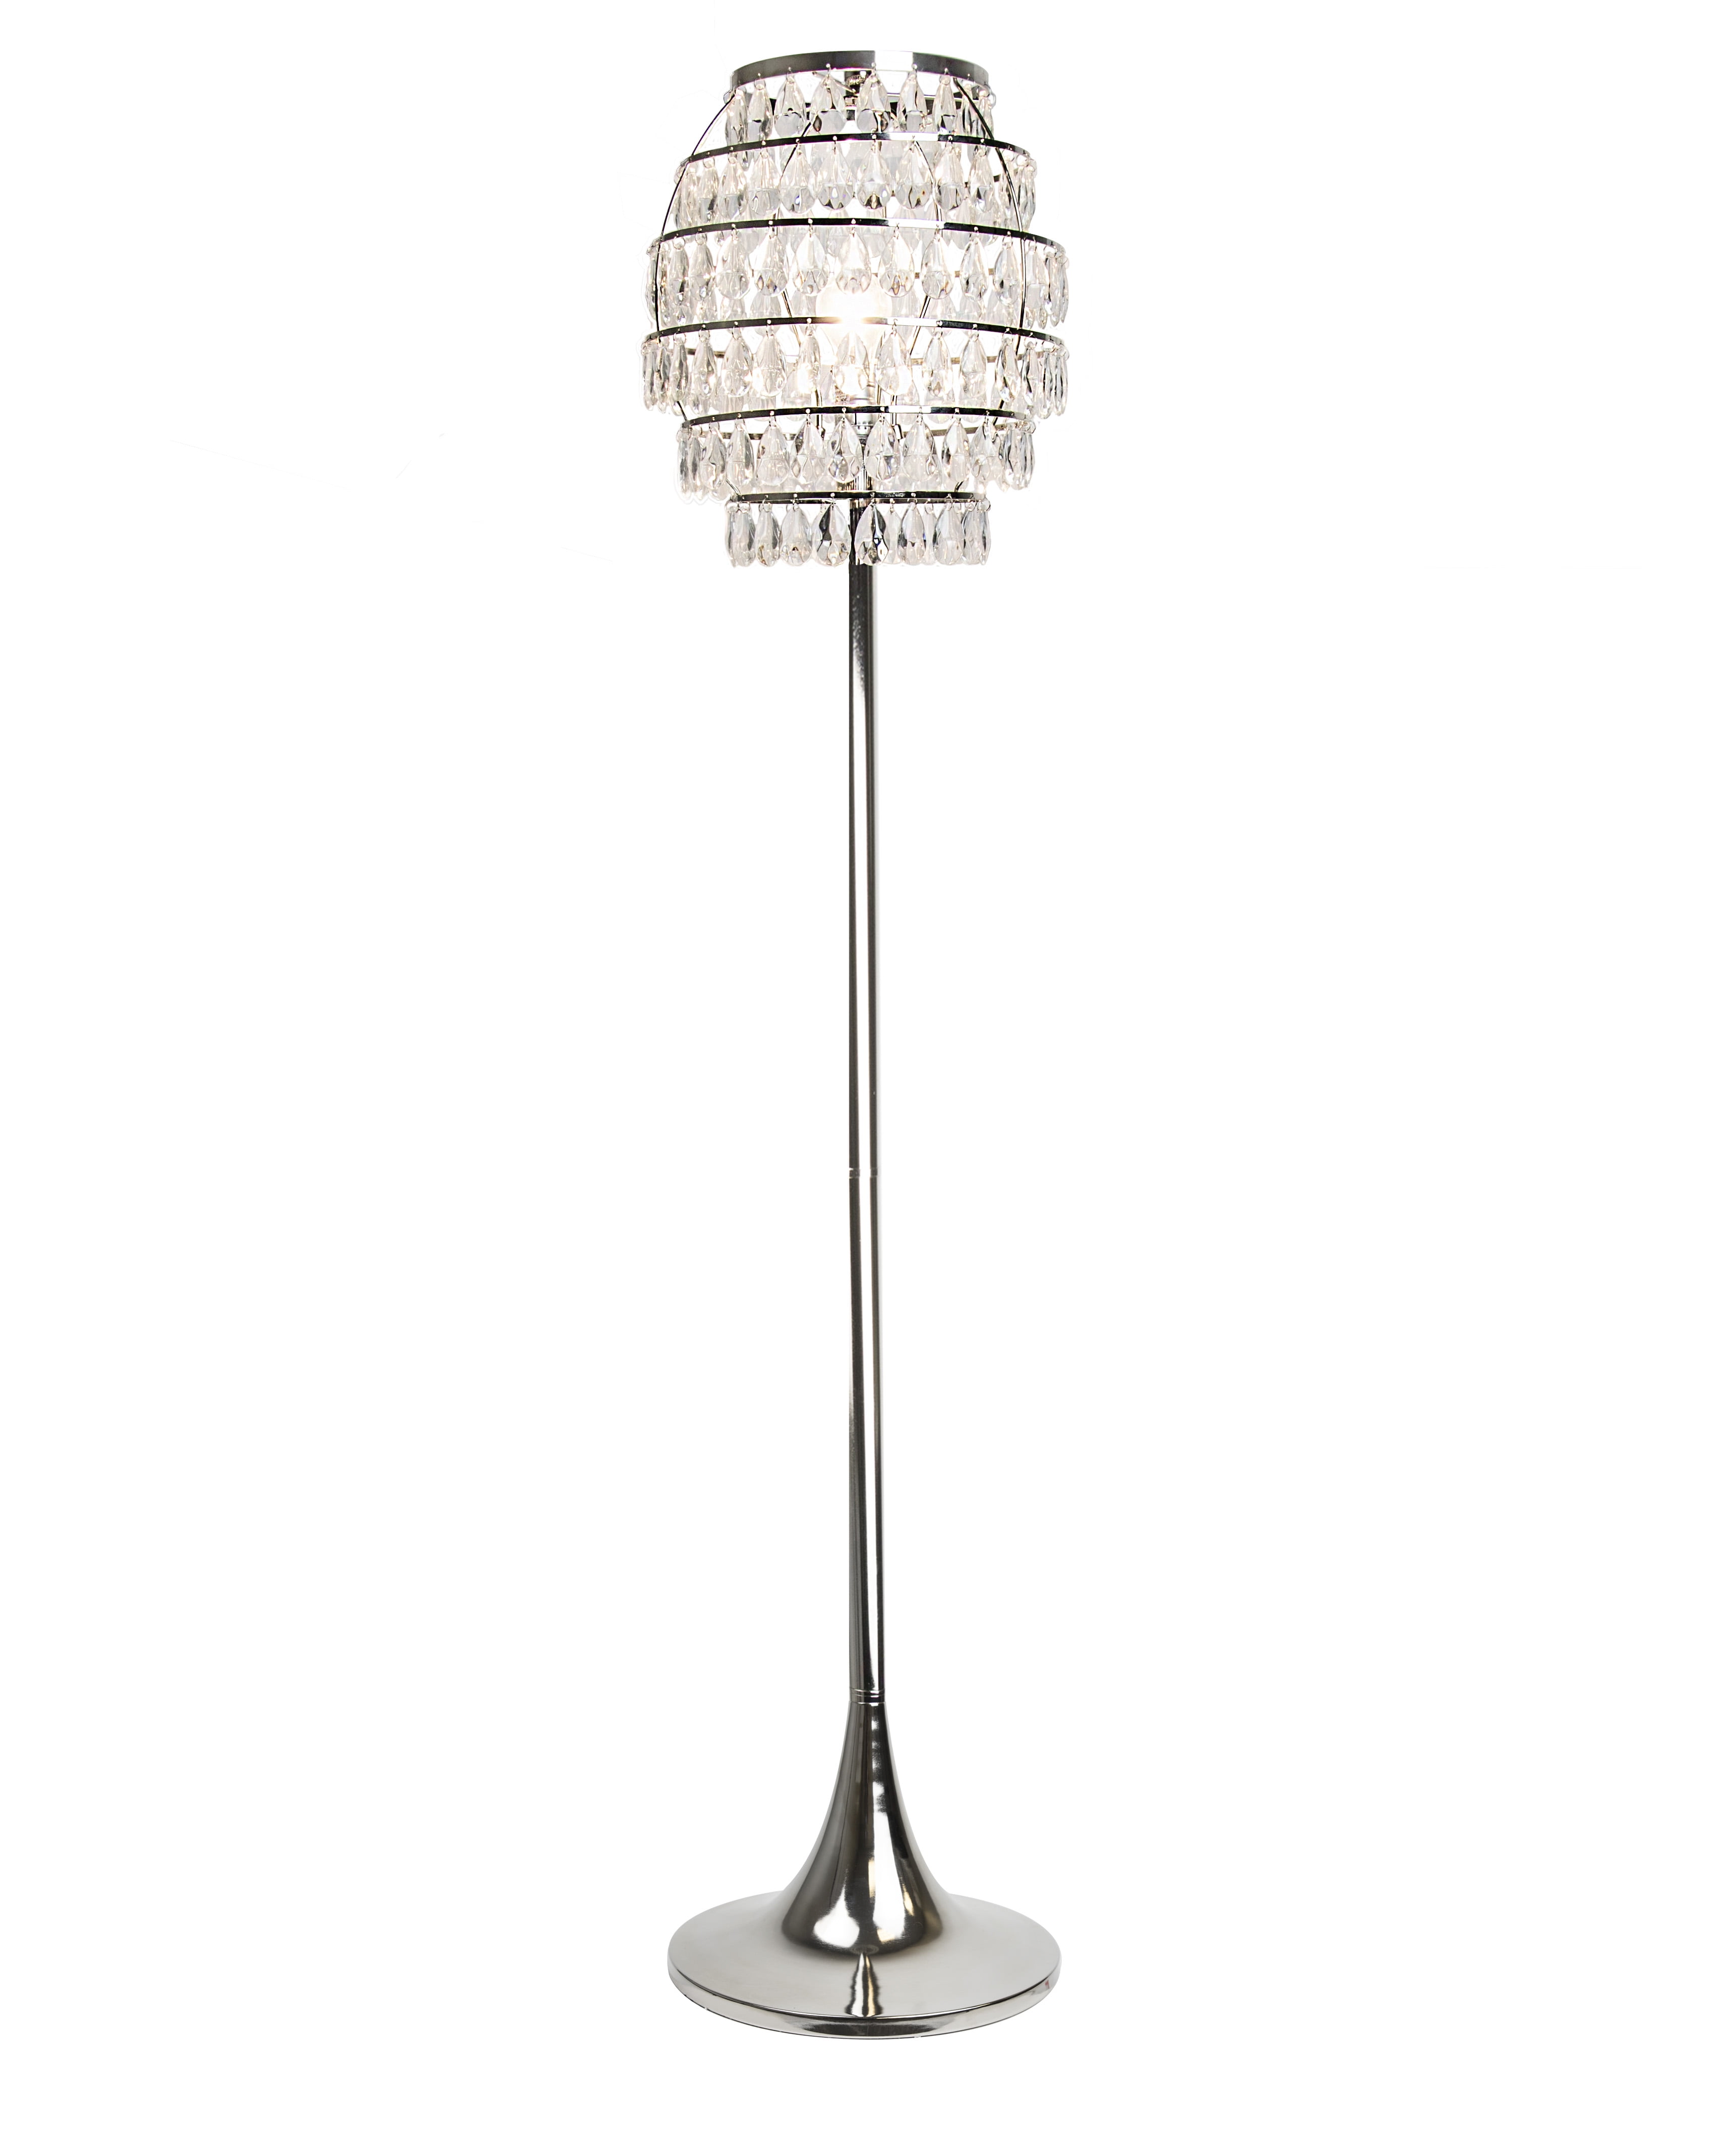 Grandview Gallery 63 25 Polished Nickel Modern Bling Floor Lamp Ft 6 Tier Shade With Genuine Crystal Faceted Teardrop Dangles And Elegant Tapered Pedestal Base Glam Lighting For Any Space Walmart Com